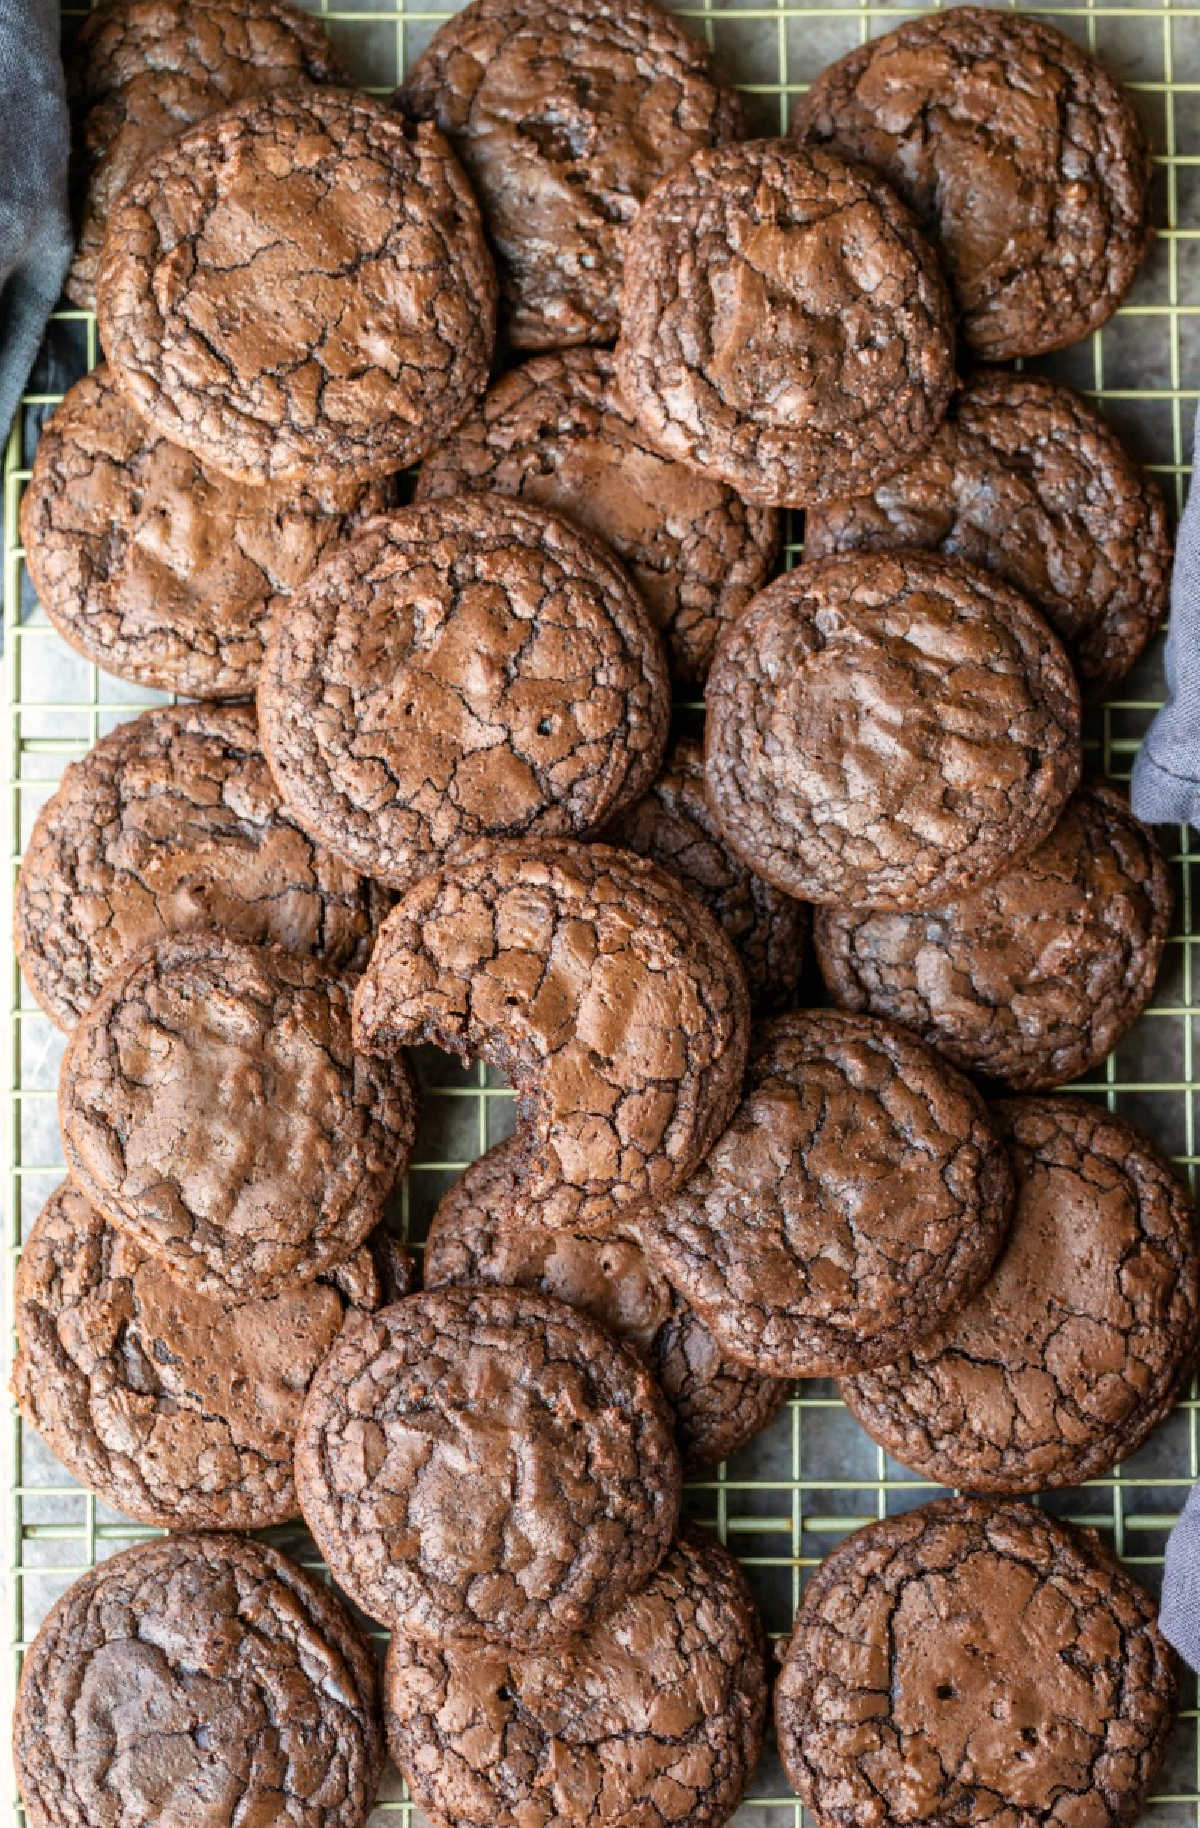 Stacks of brownie cookies on a wire cooling rack.